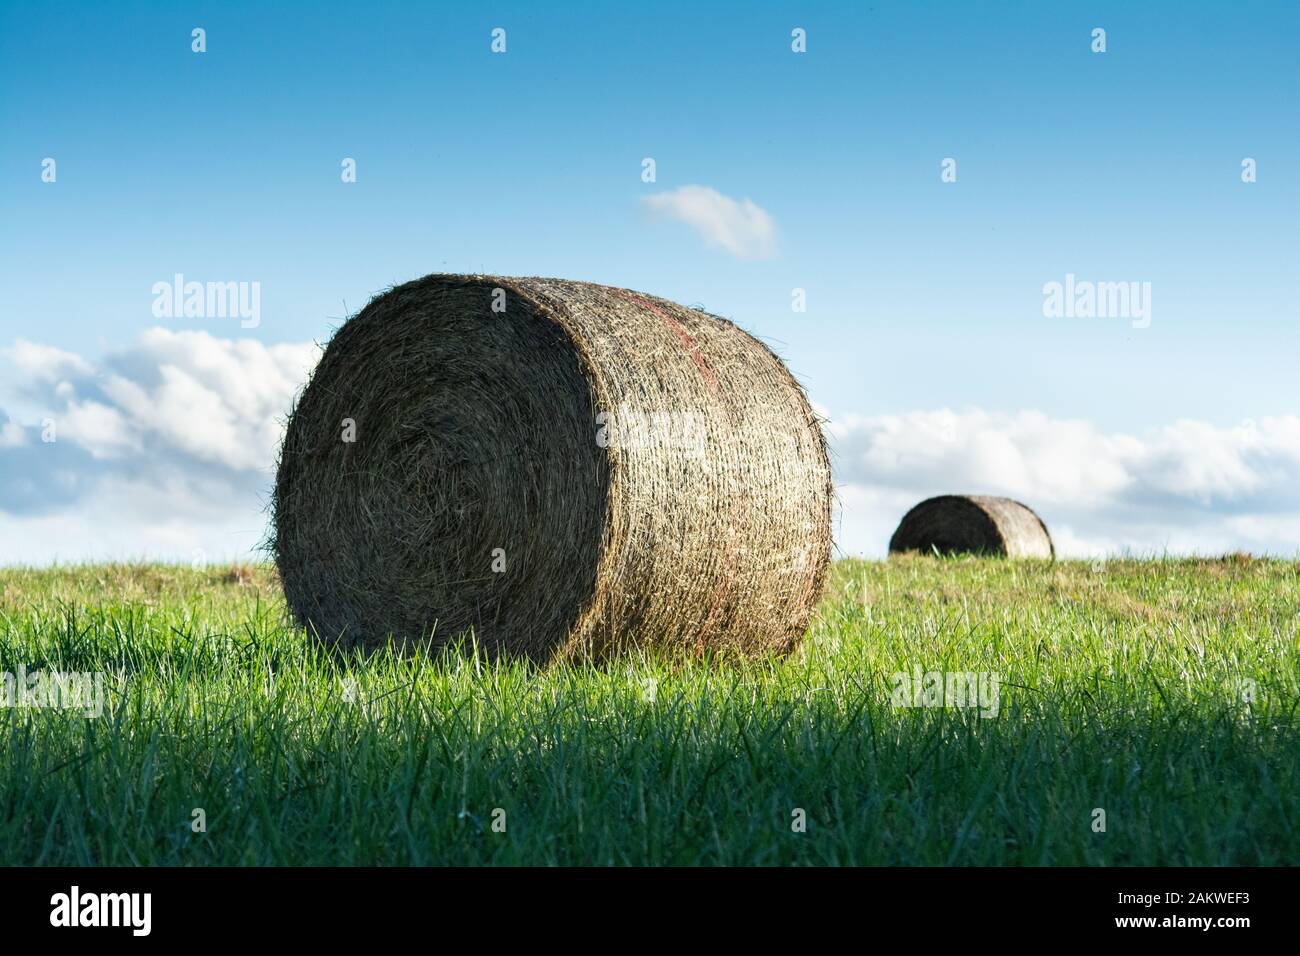 Unique view of two hay bales taken from low angle and featuring beautiful blue sky and green grass Stock Photo